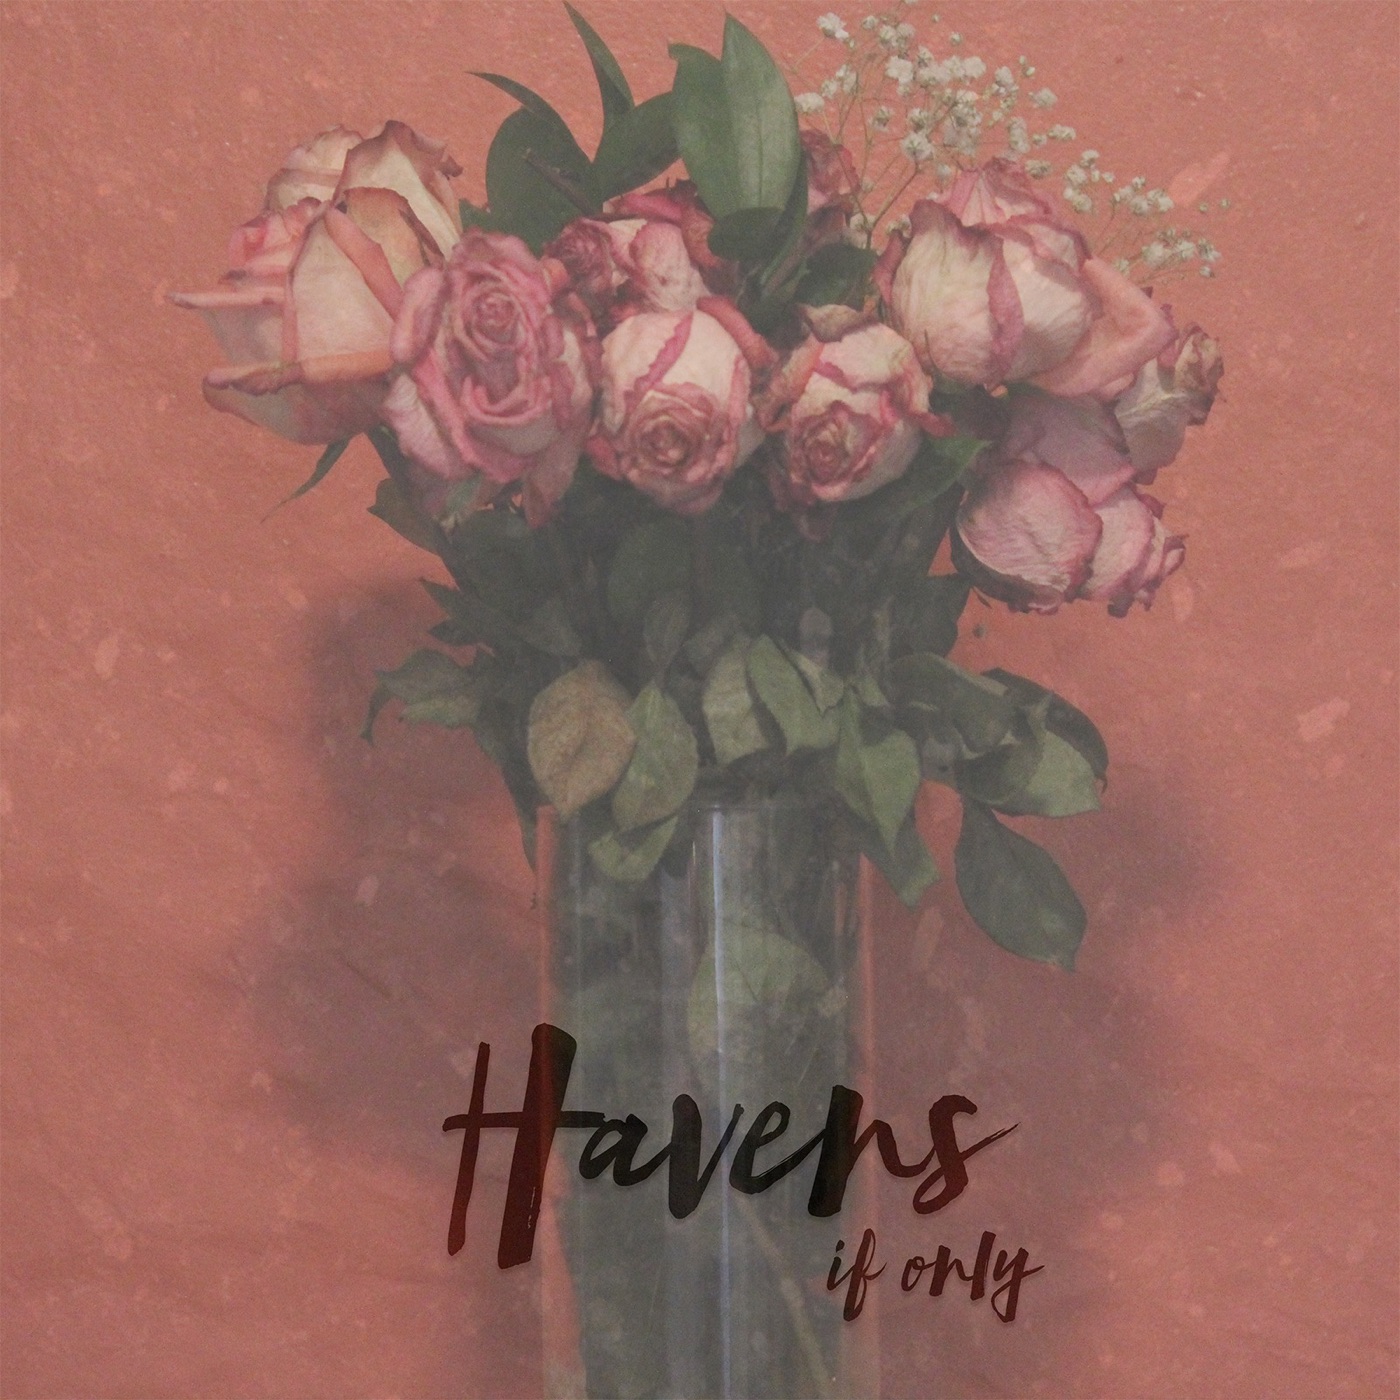 Havens - If Only [single] (2018)